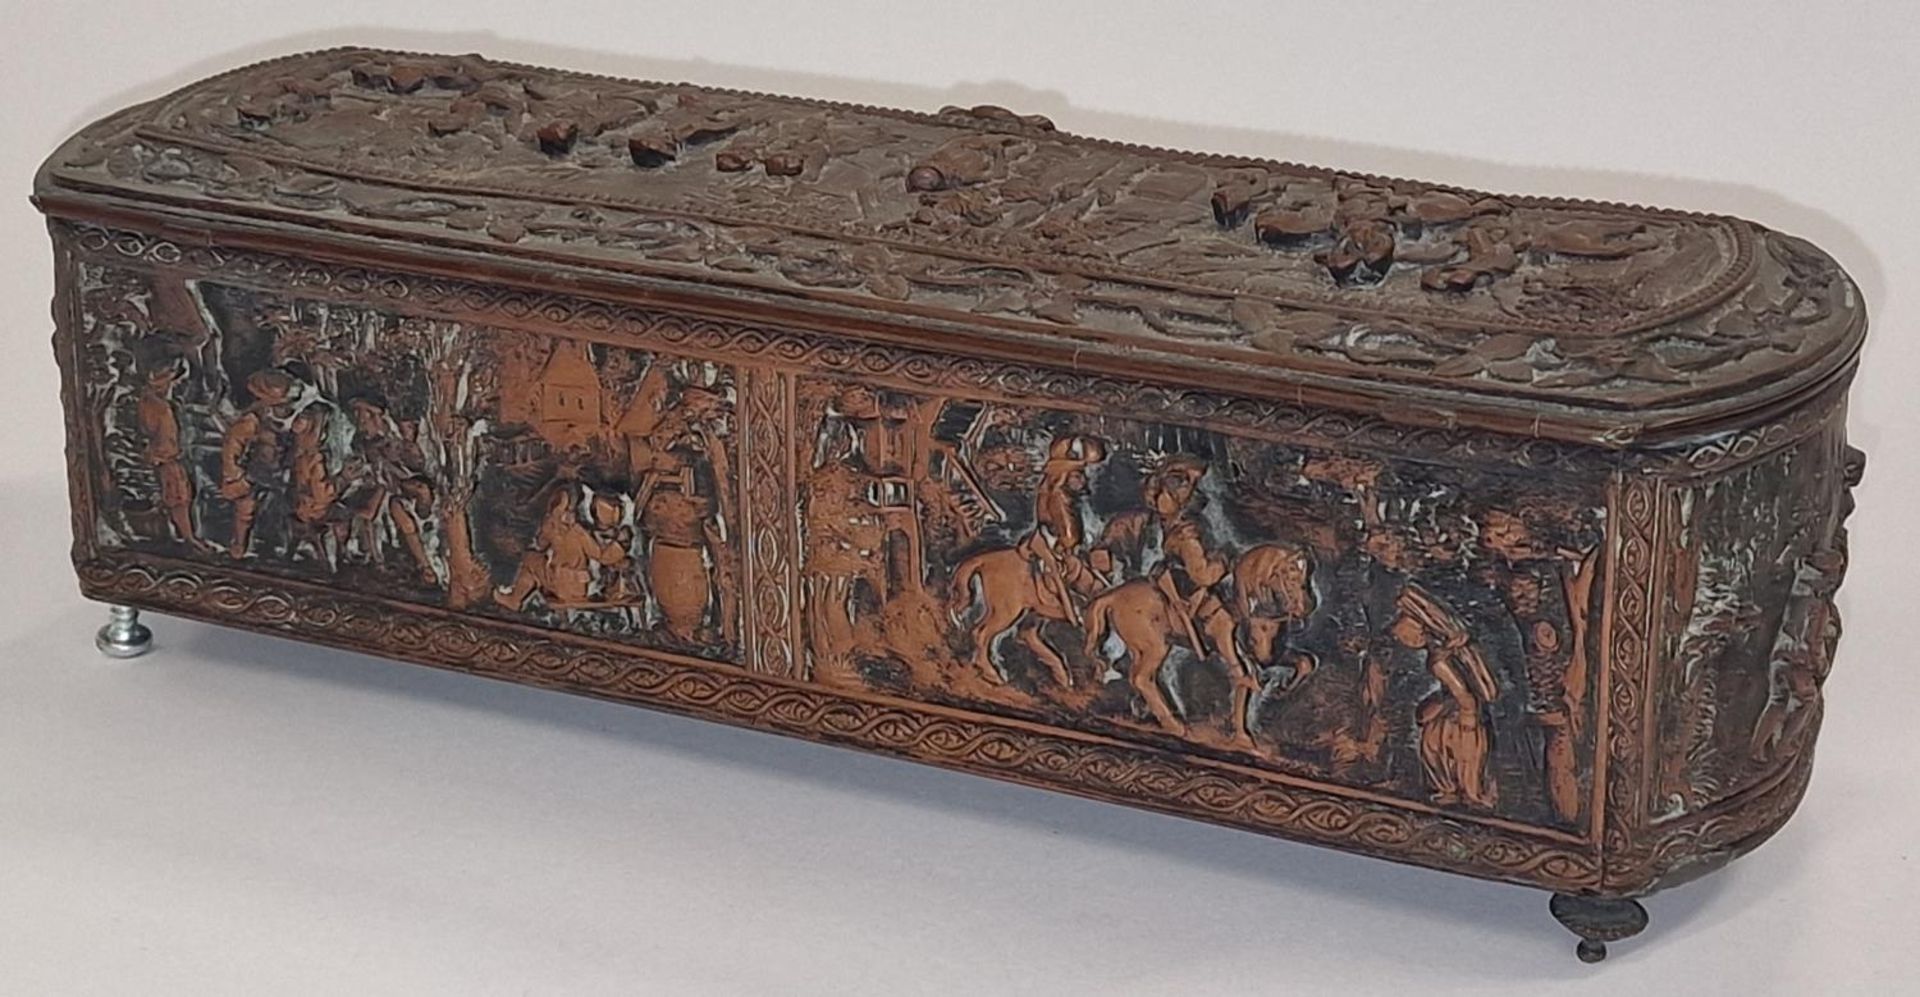 Antique French carved copper box. - Image 2 of 3